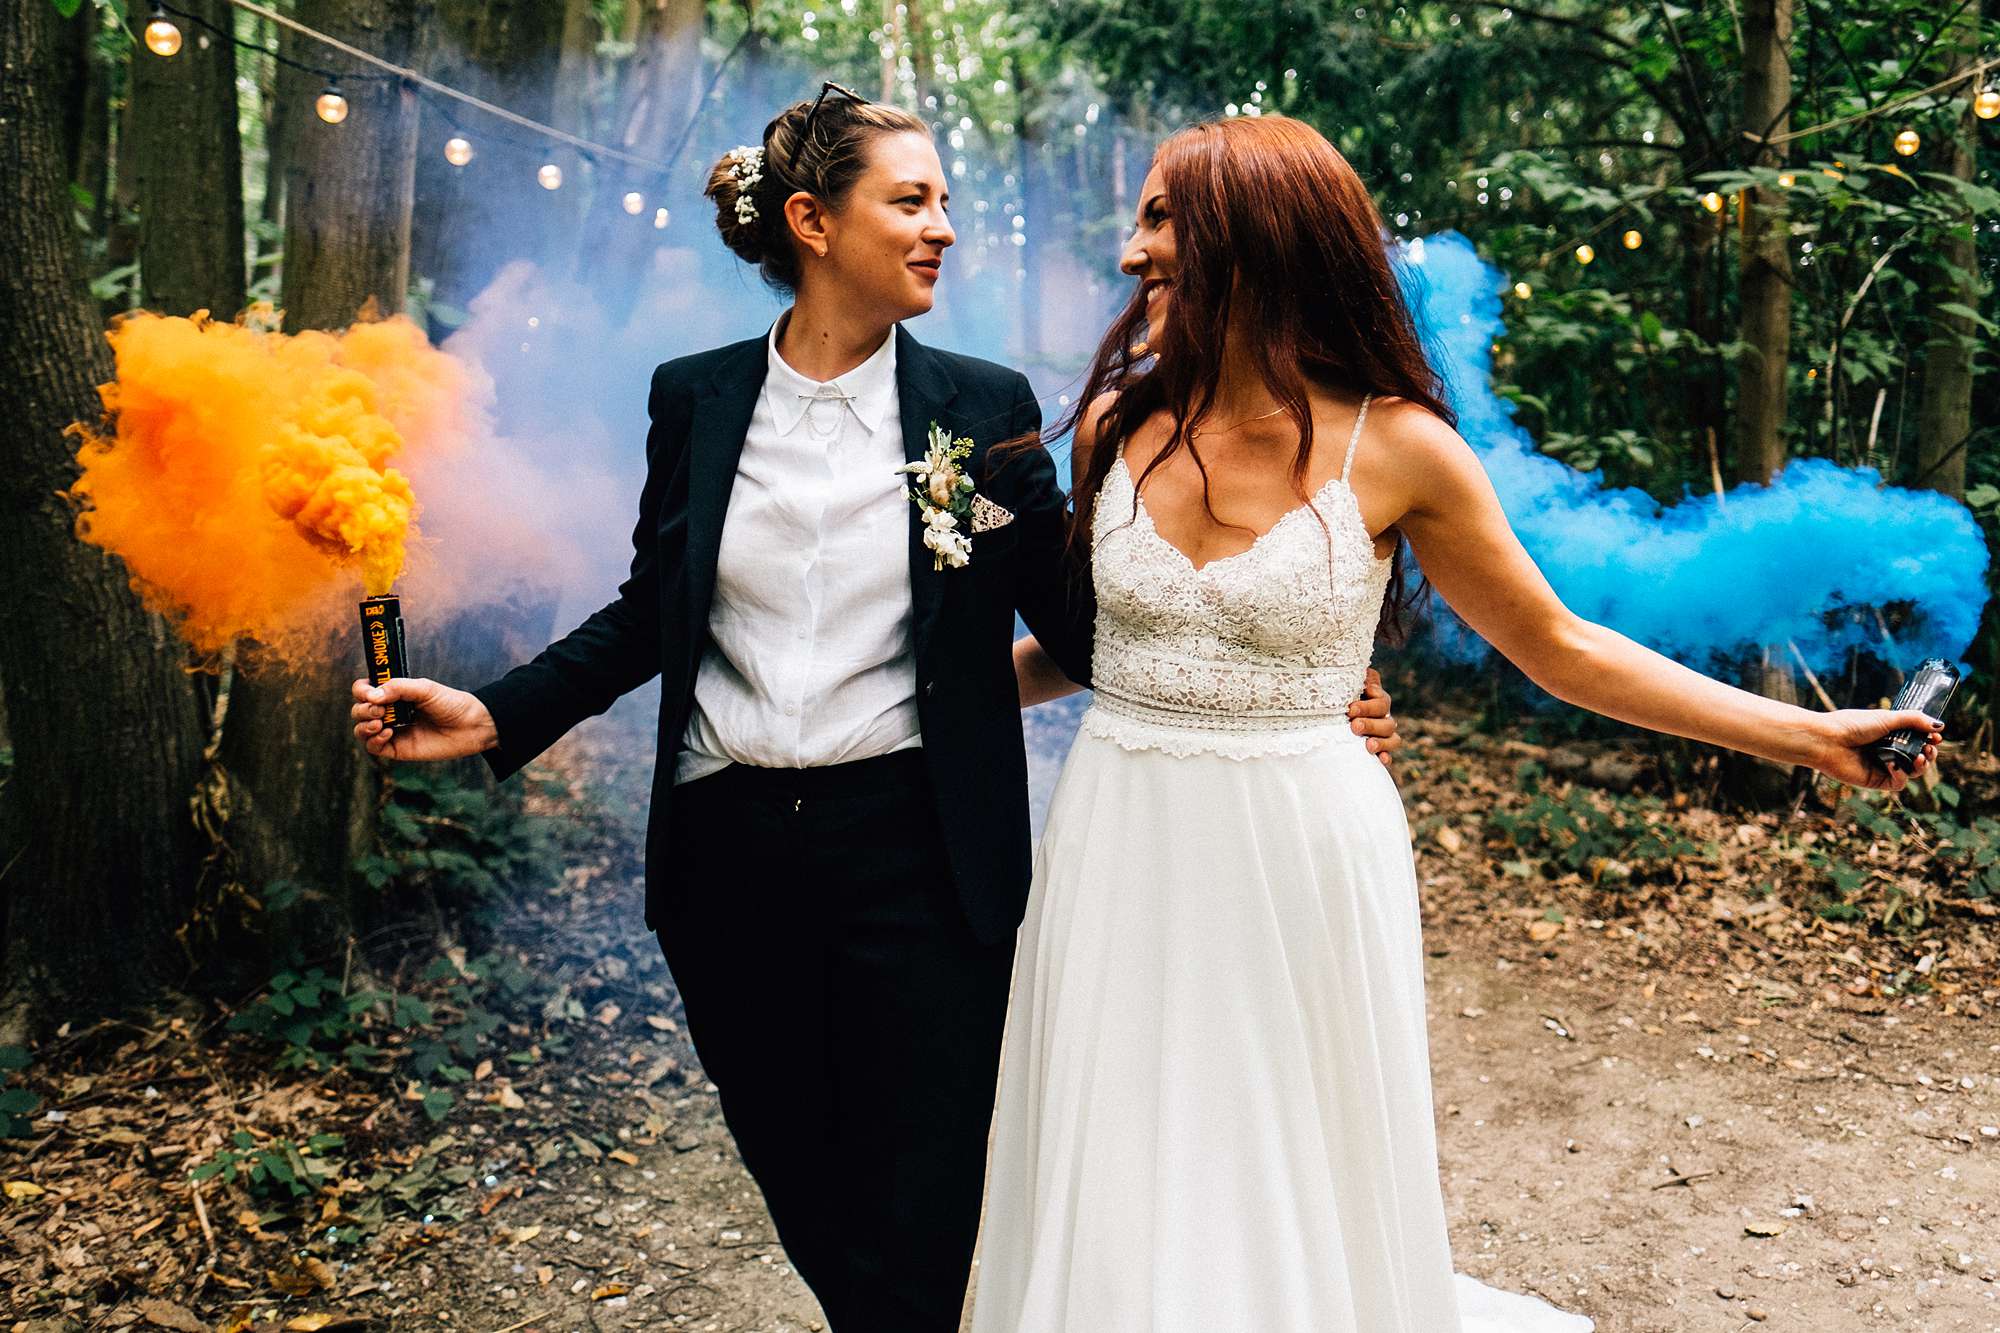 Smoke bombs at The Dreys woodland wedding with Vicky and Hollie.